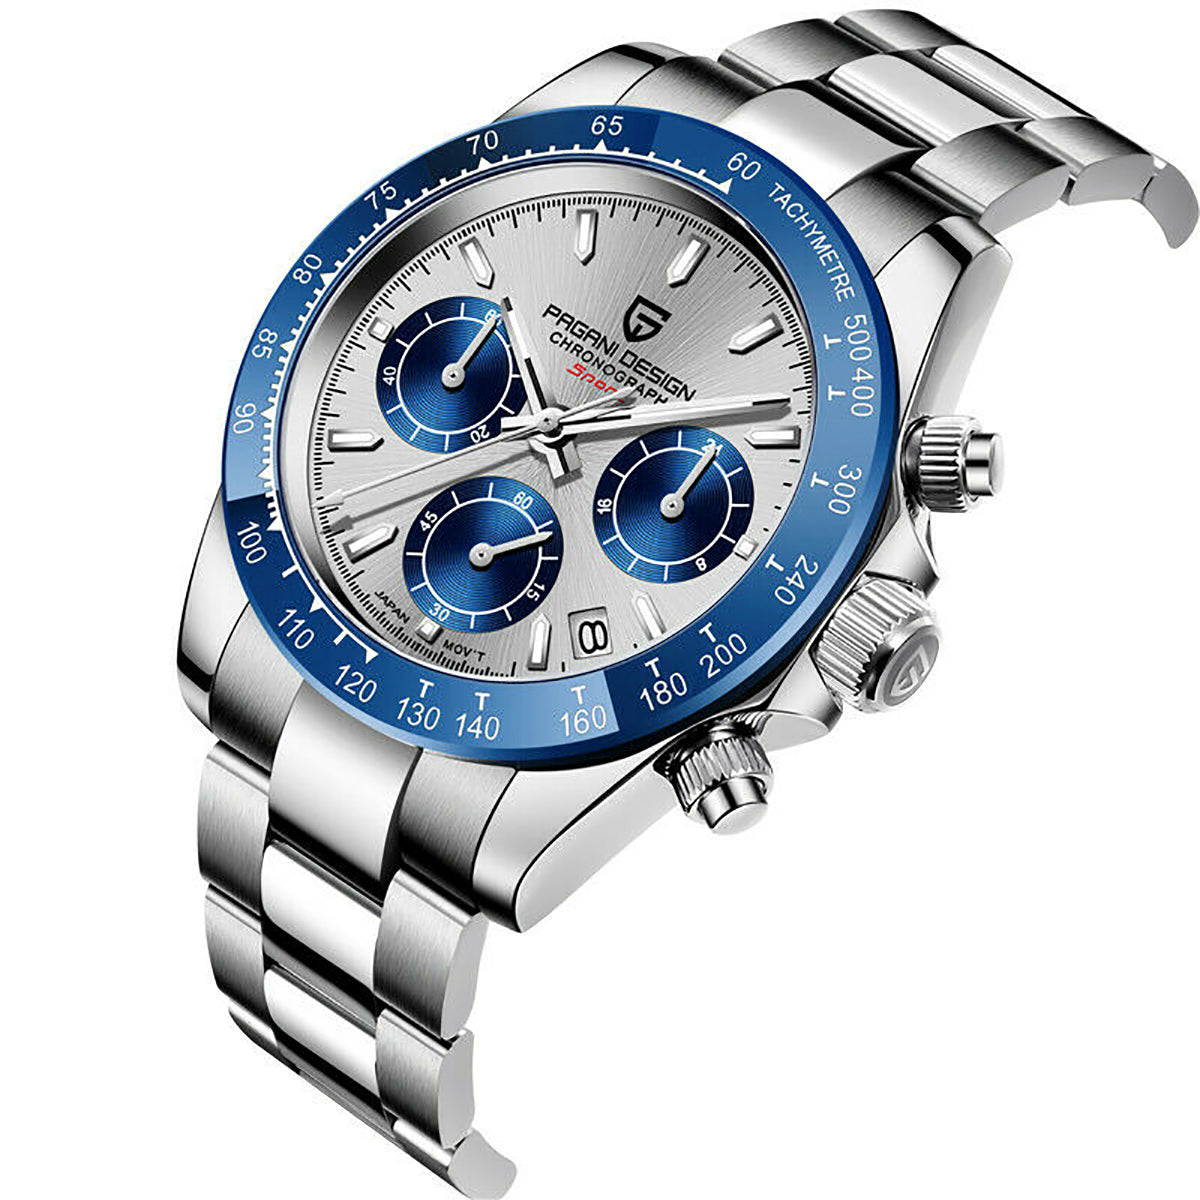 Pagani Design Formal Mens Watch With Elegant Blue and Silver Dial